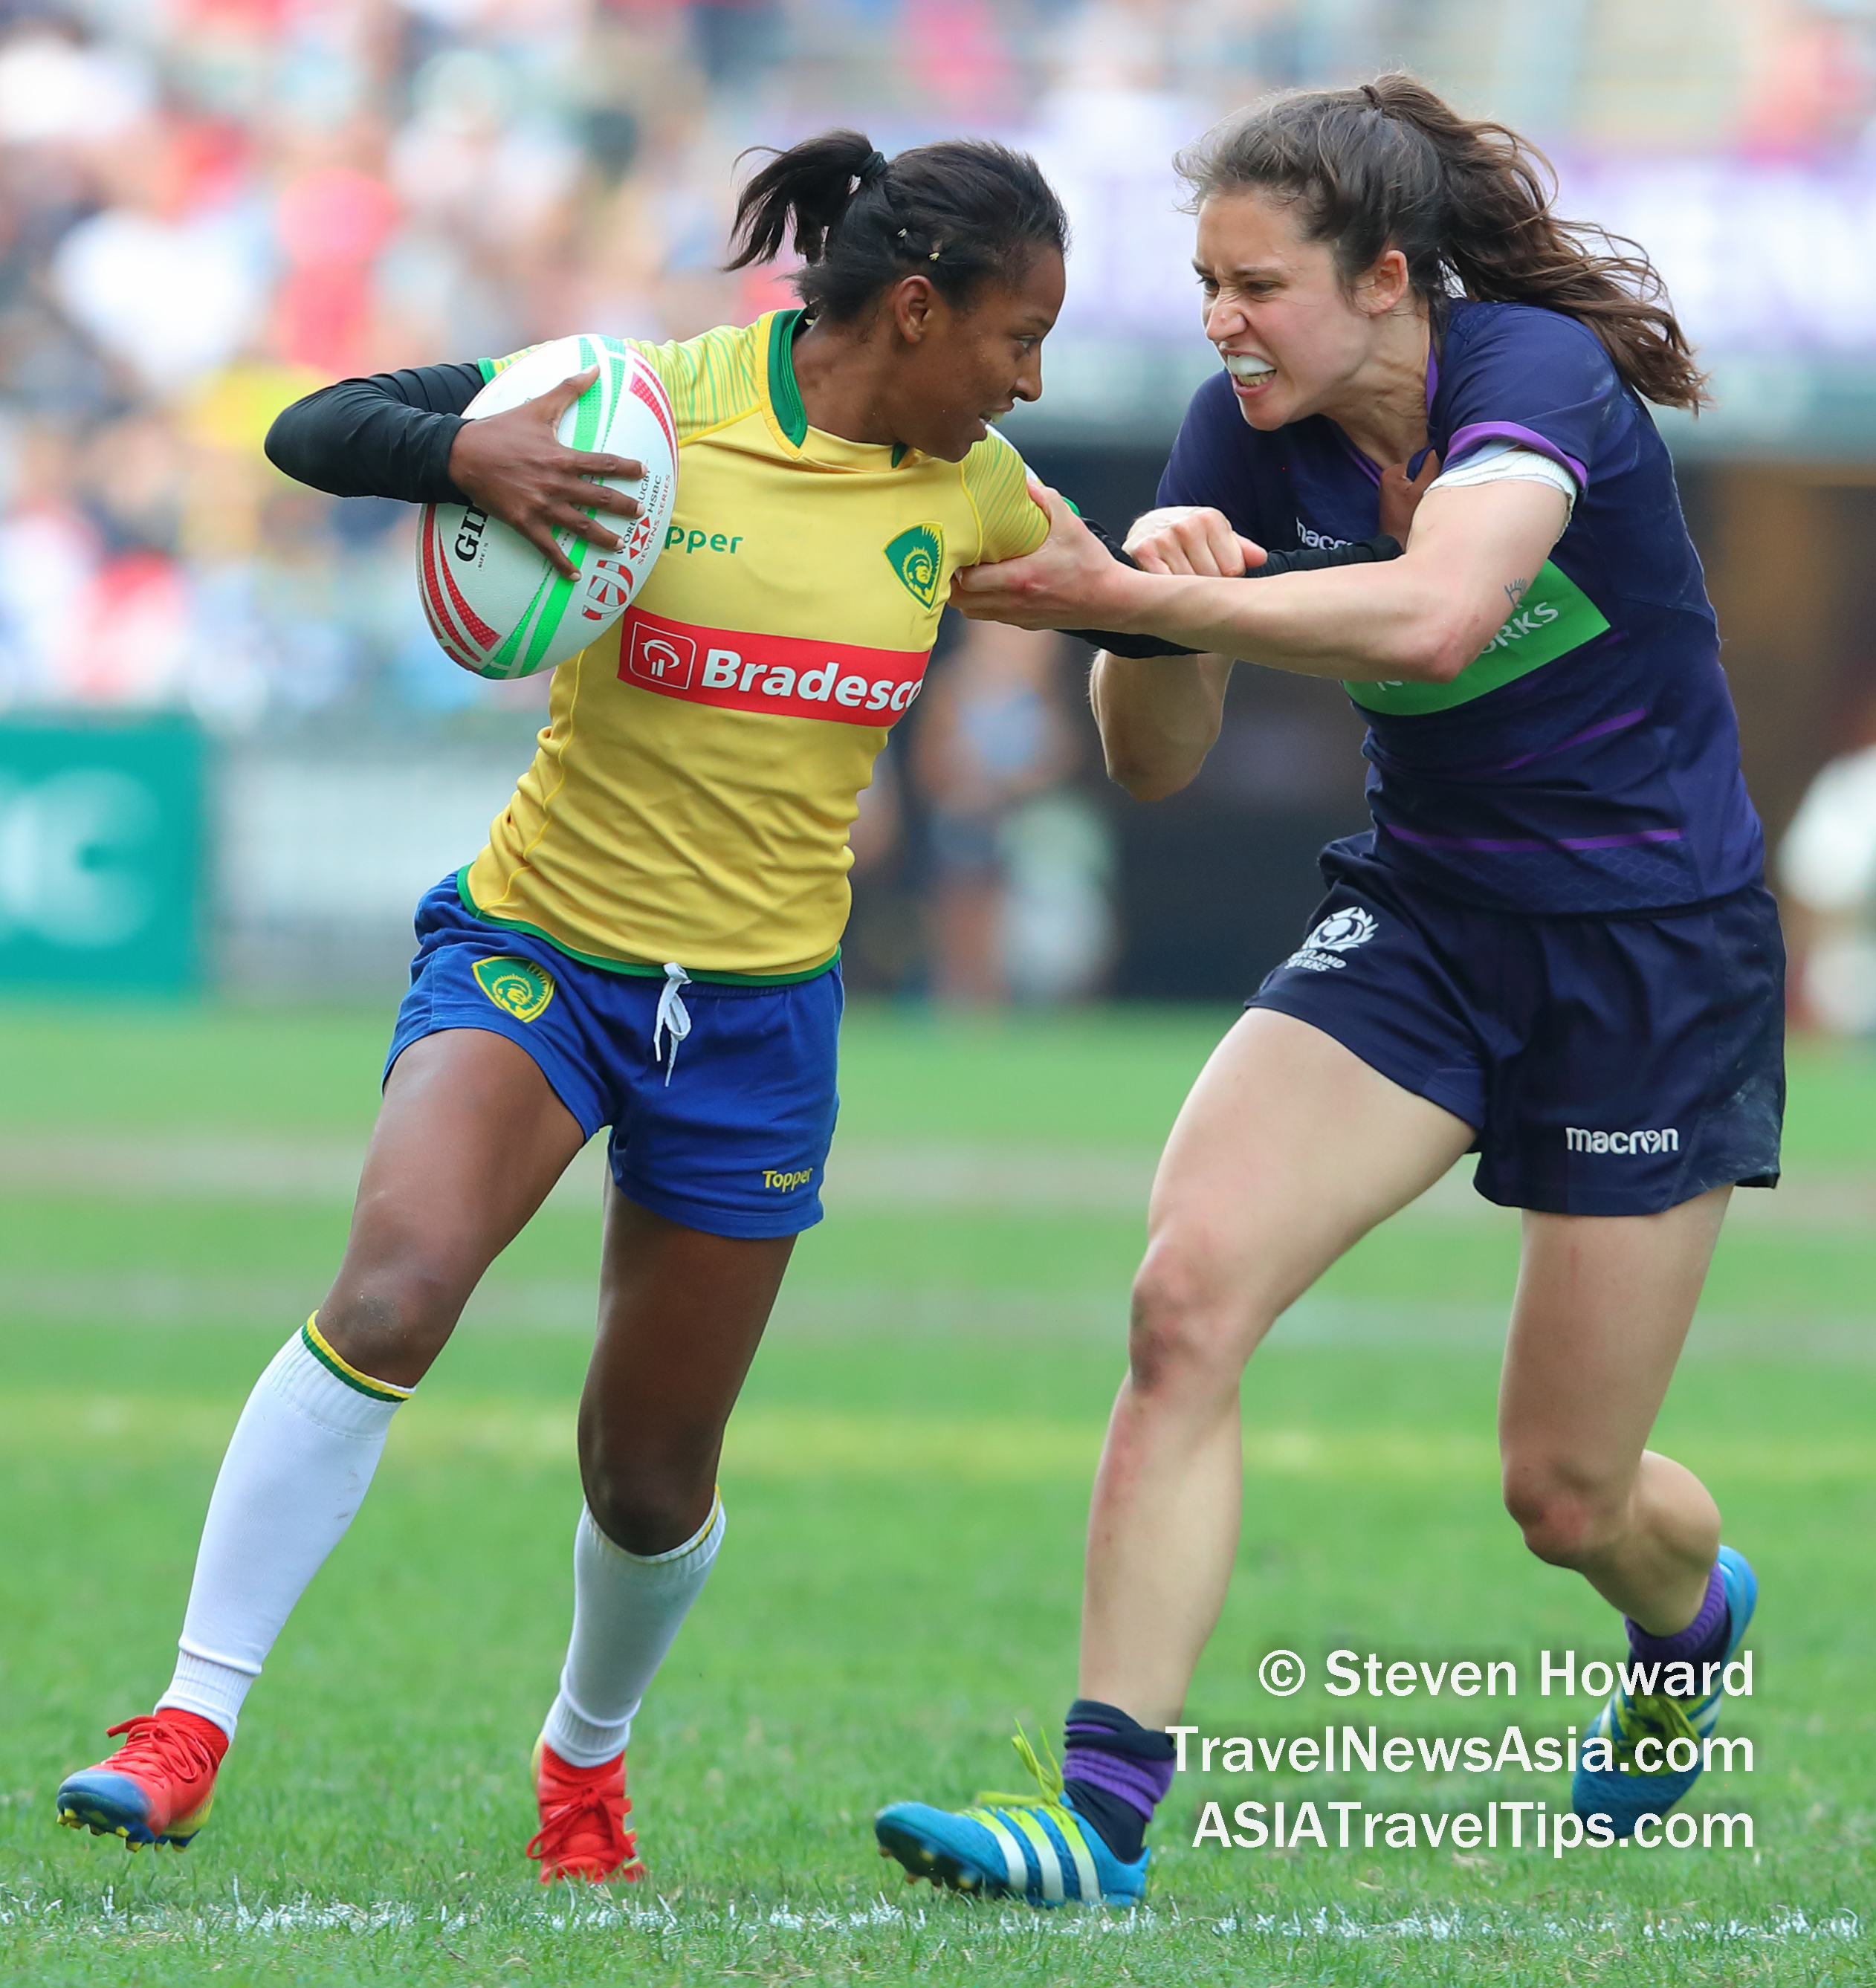 Scotland women in action against Brazil during the Cathay Pacific / HSBC Hong Kong Sevens 2019. Picture by Steven Howard of TravelNewsAsia.com Click to enlarge.